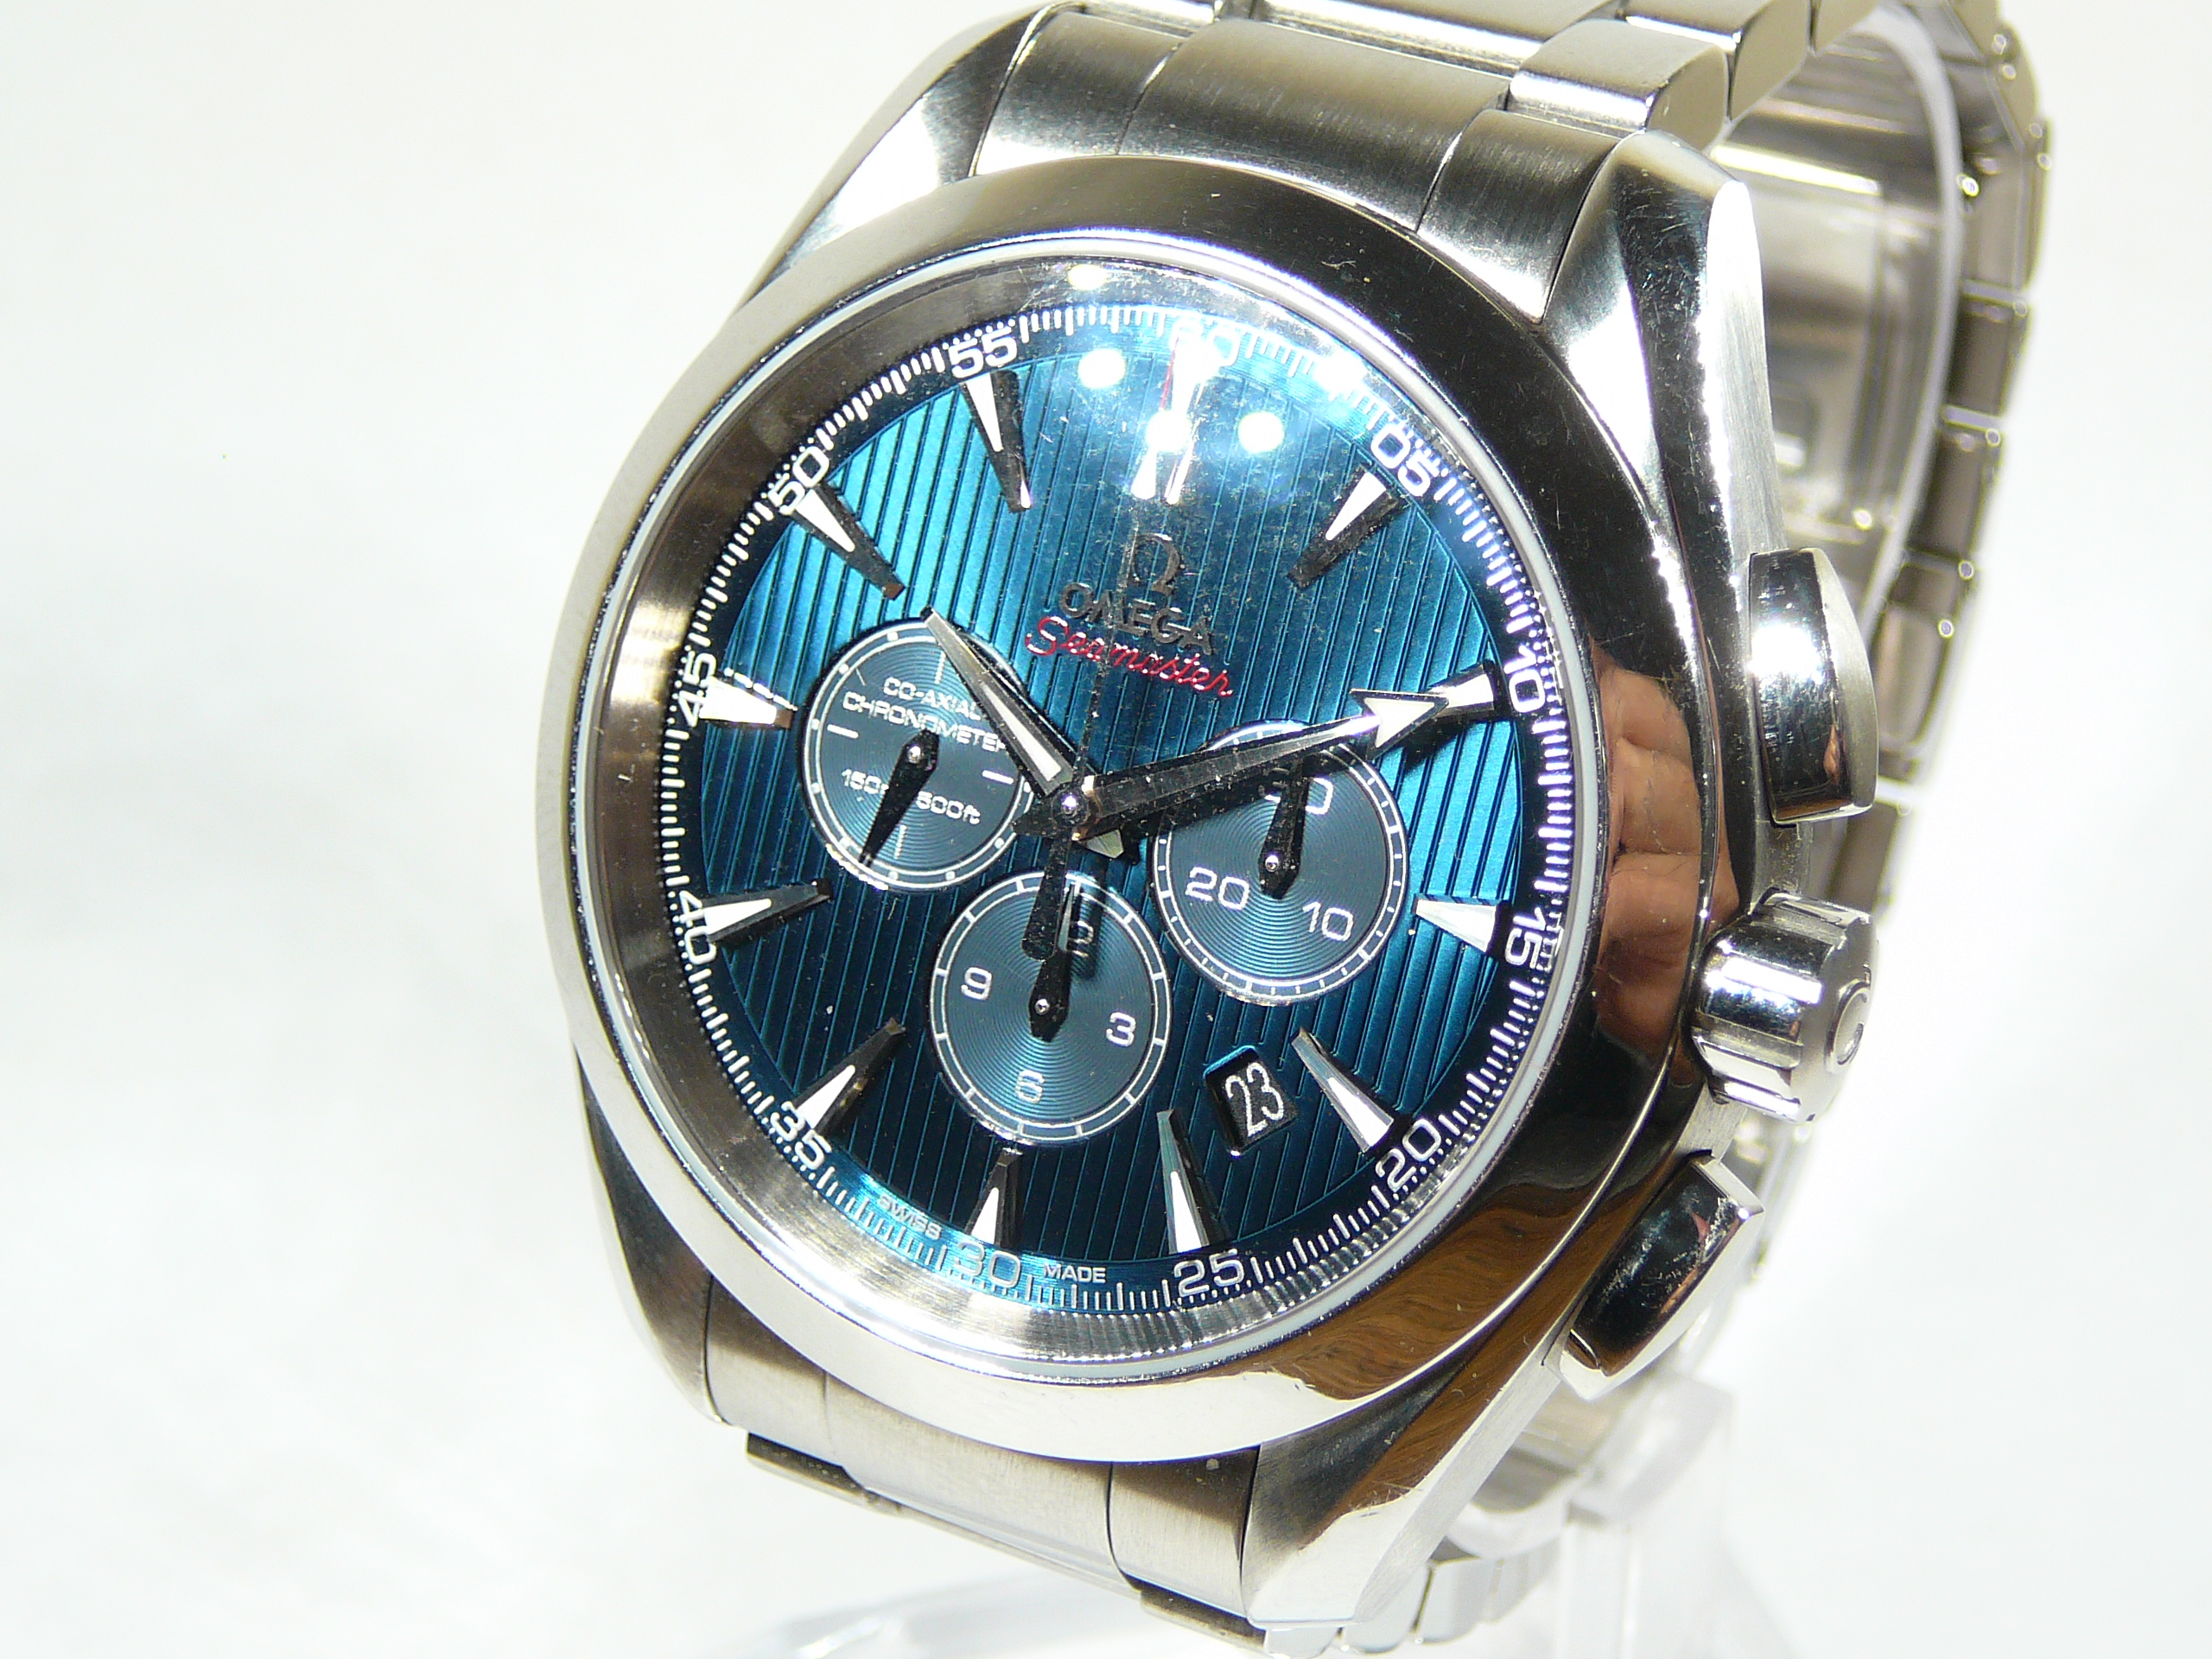 Gents Omega Wrist Watch - Image 2 of 3